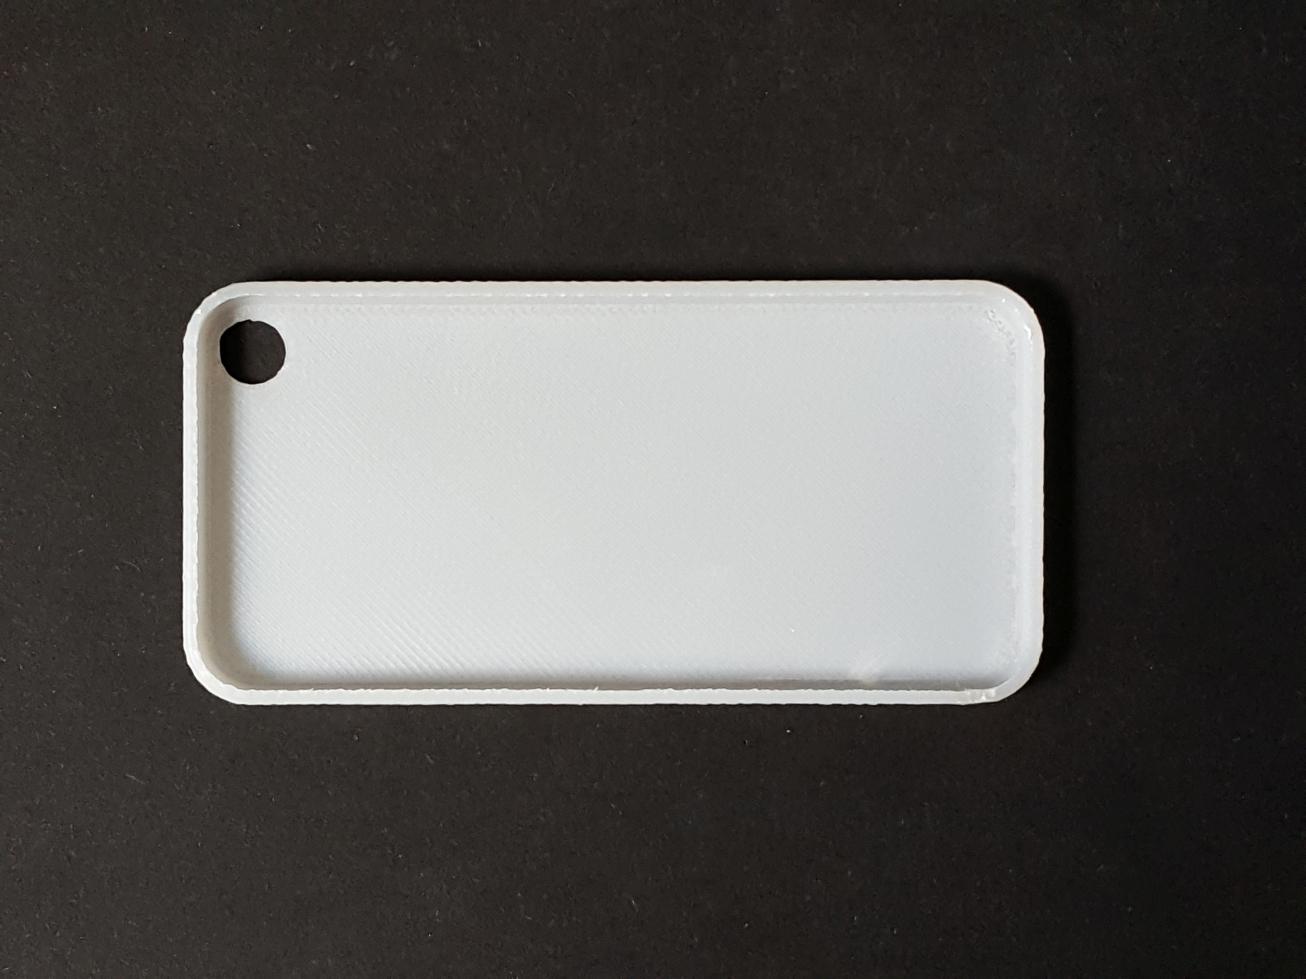 3D printed iPhone 7 cover template | MyMiniFactory Design Competition